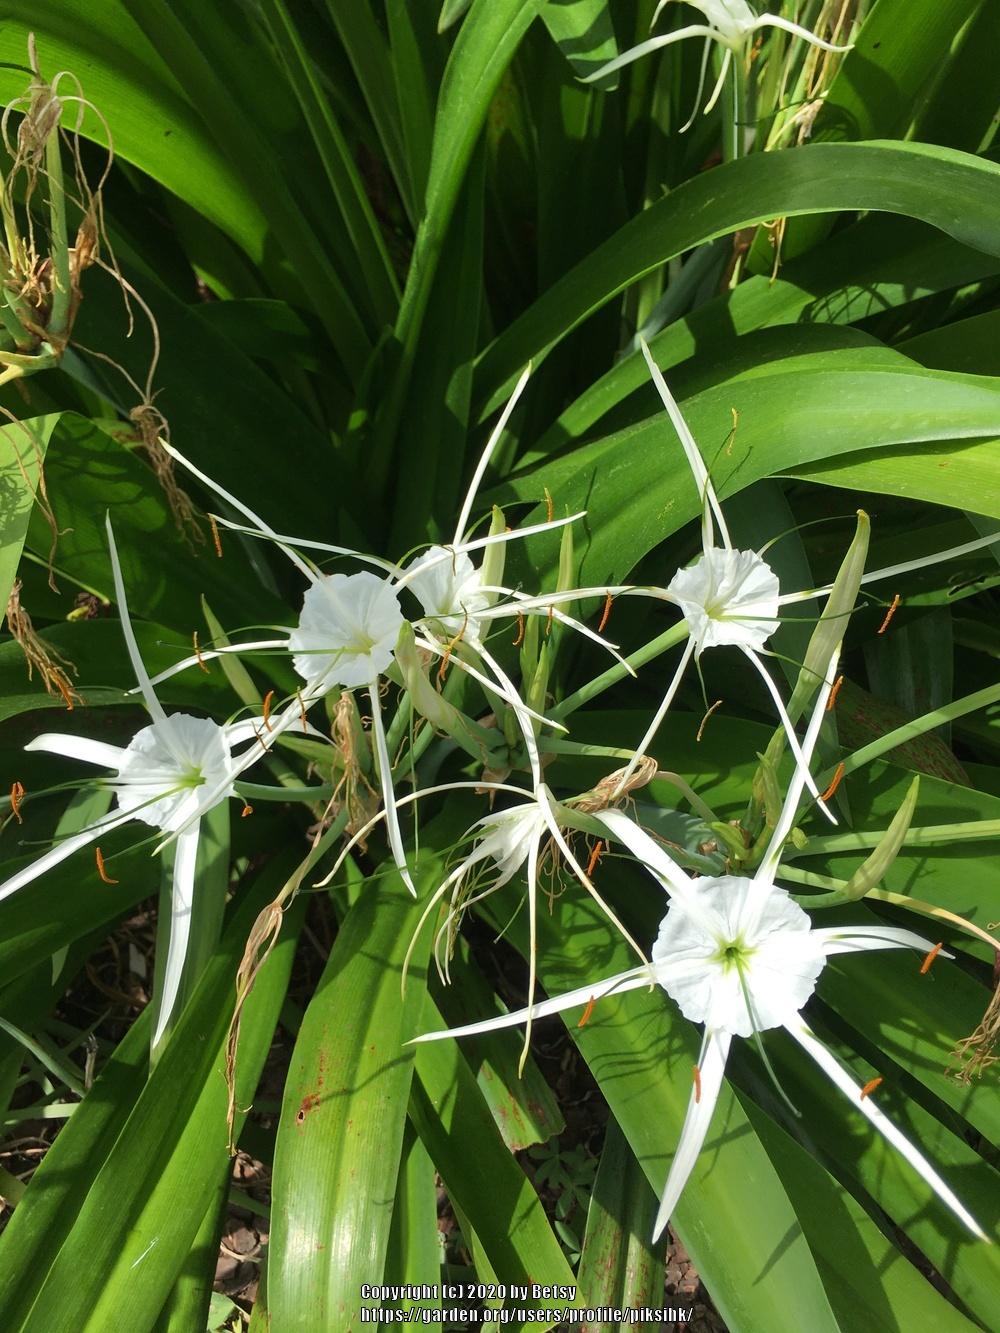 Photo of Spider Lilies (Hymenocallis) uploaded by piksihk